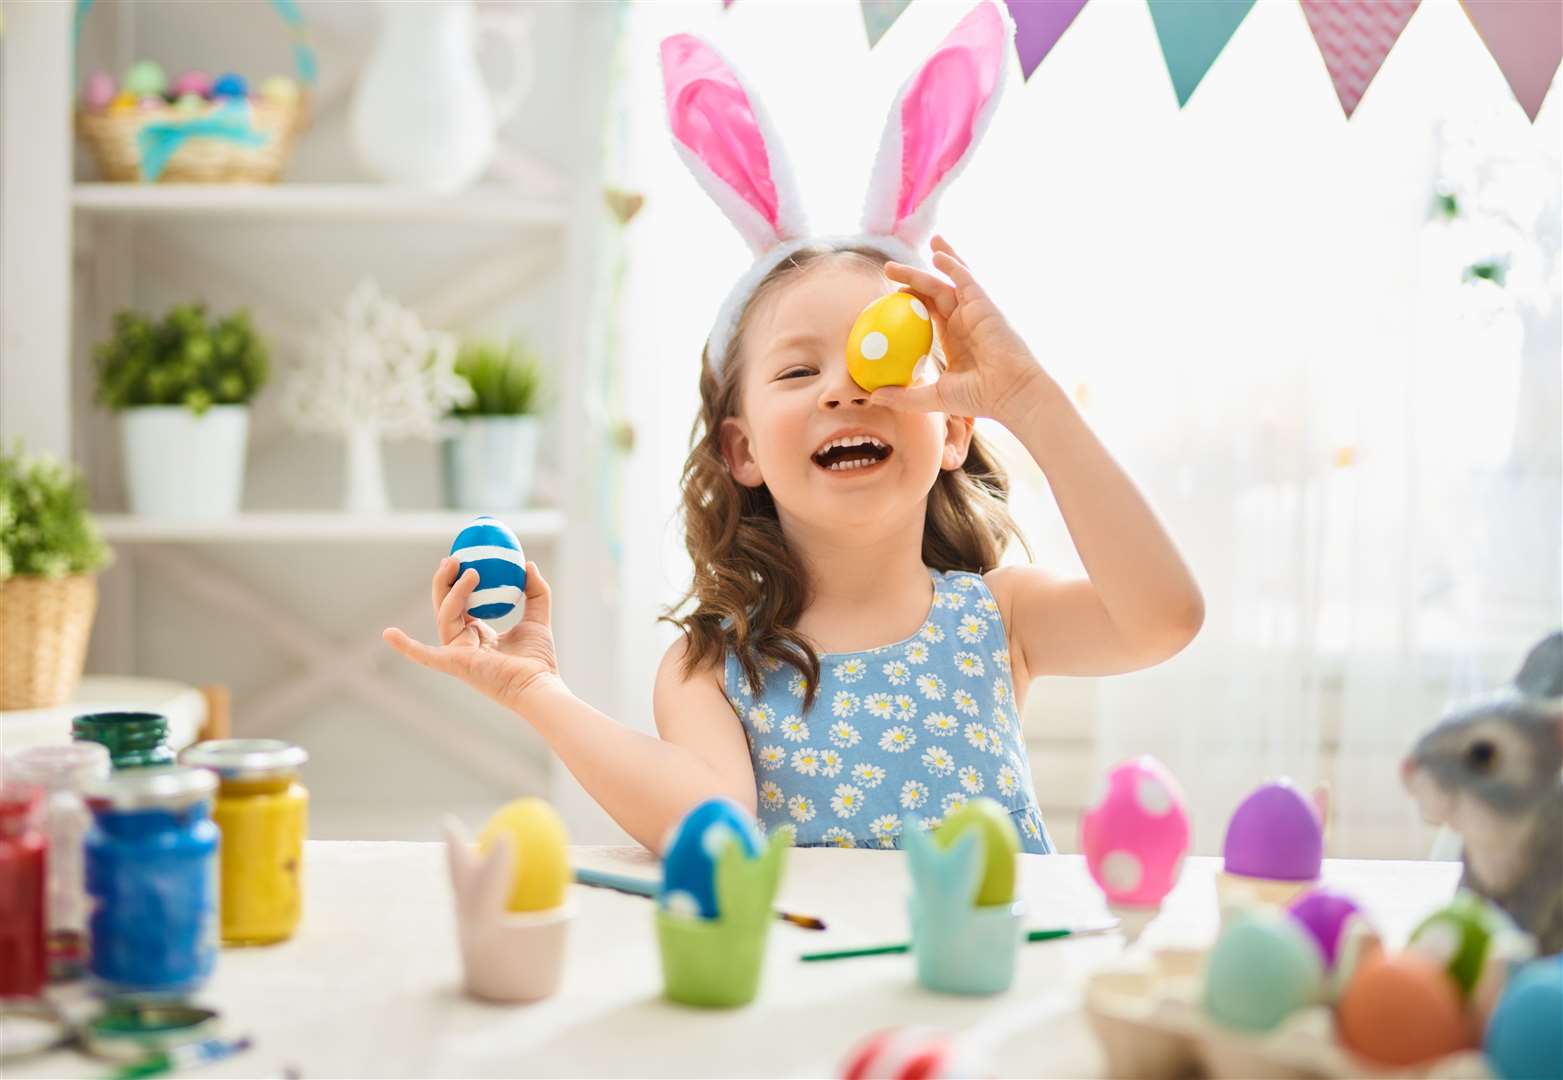 There's egg-cellent fun to be had at Easter.